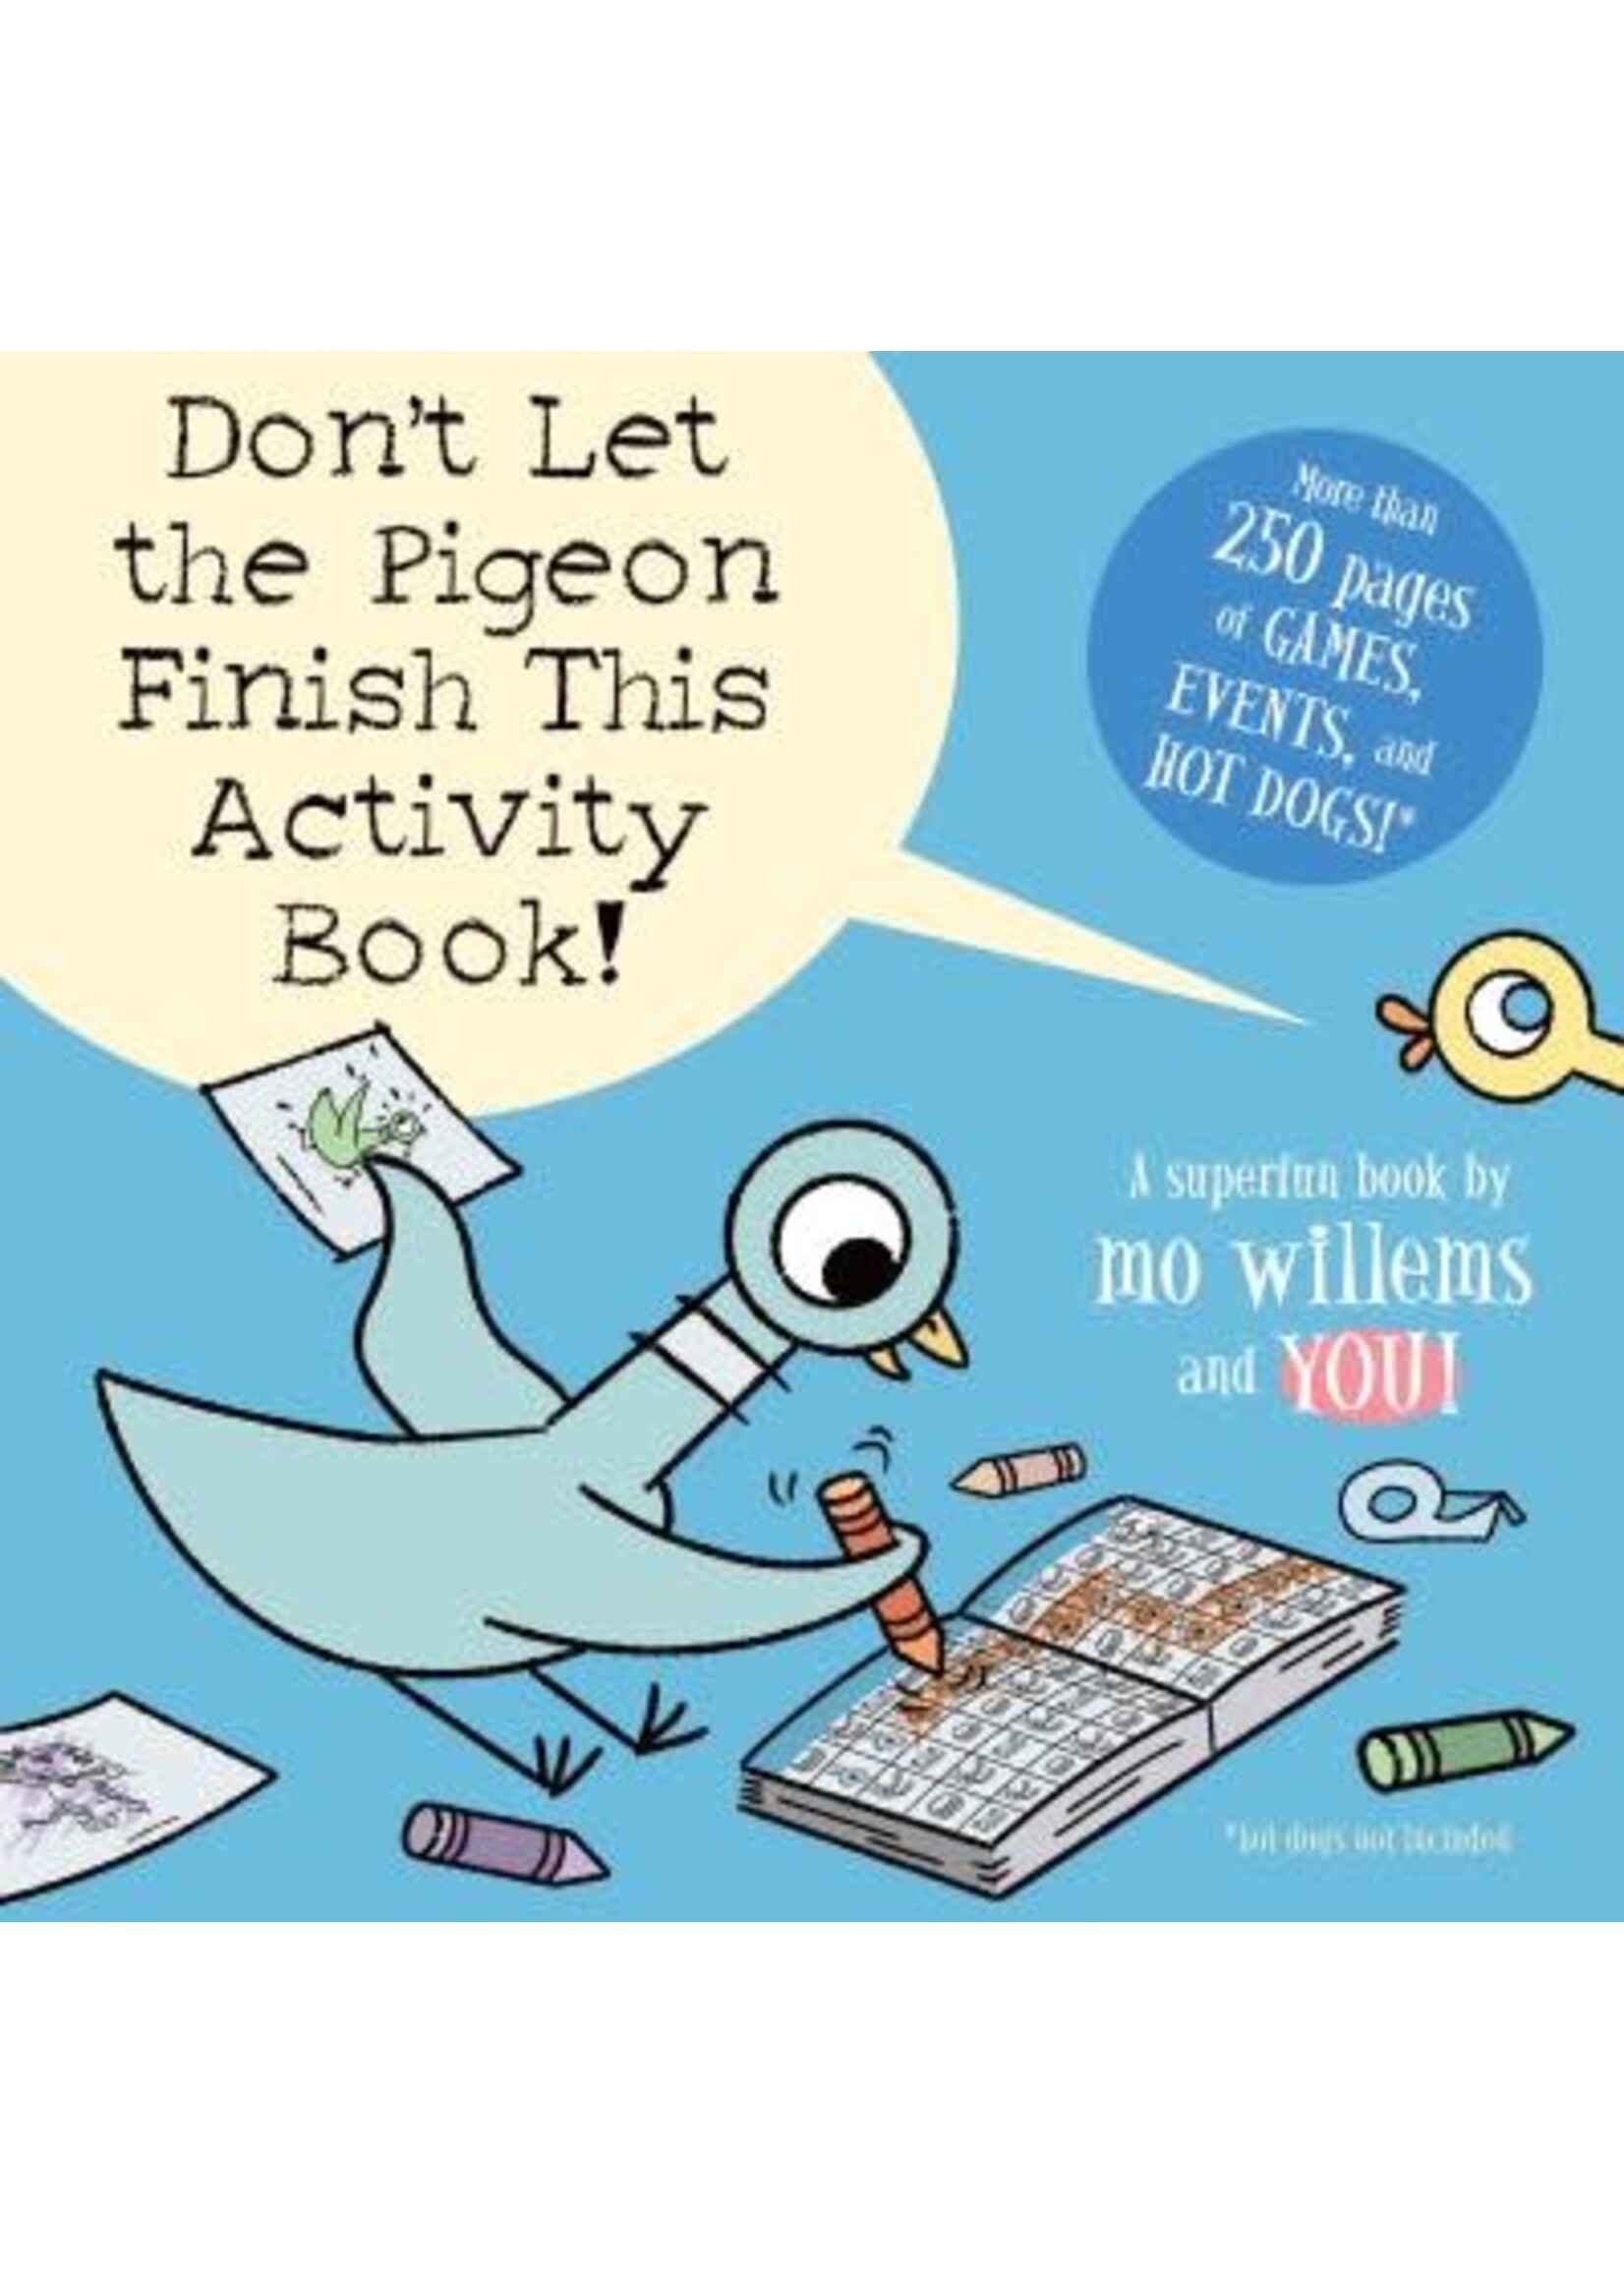 Don't Let the Pigeon Finish This Activity Book! by Mo Willems